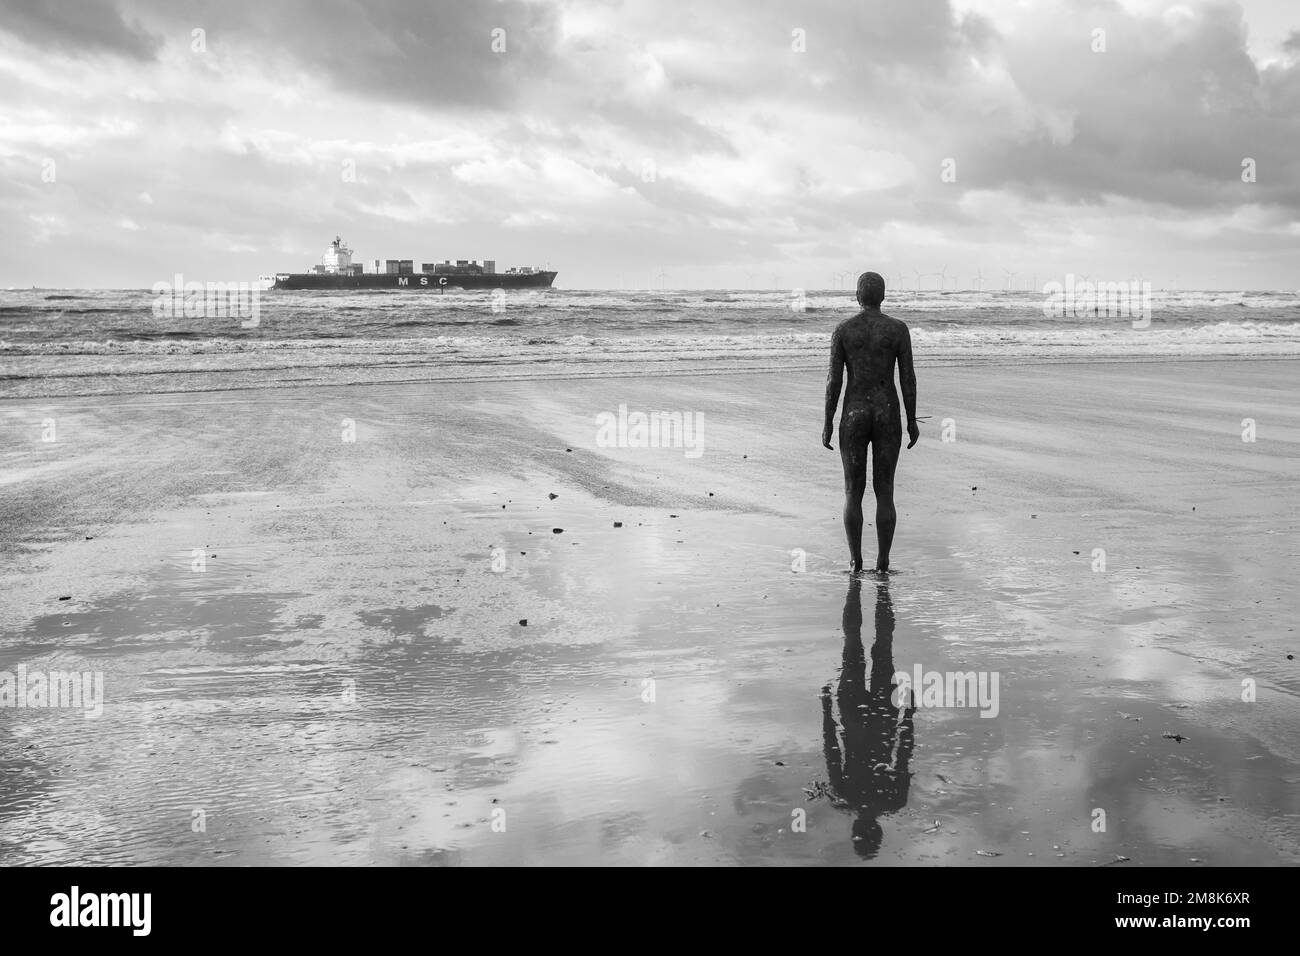 One of the Iron Men at Another Place on Crosby beach near Liverpool watches a large container ship exiting the River Mersey in January 2023. Stock Photo